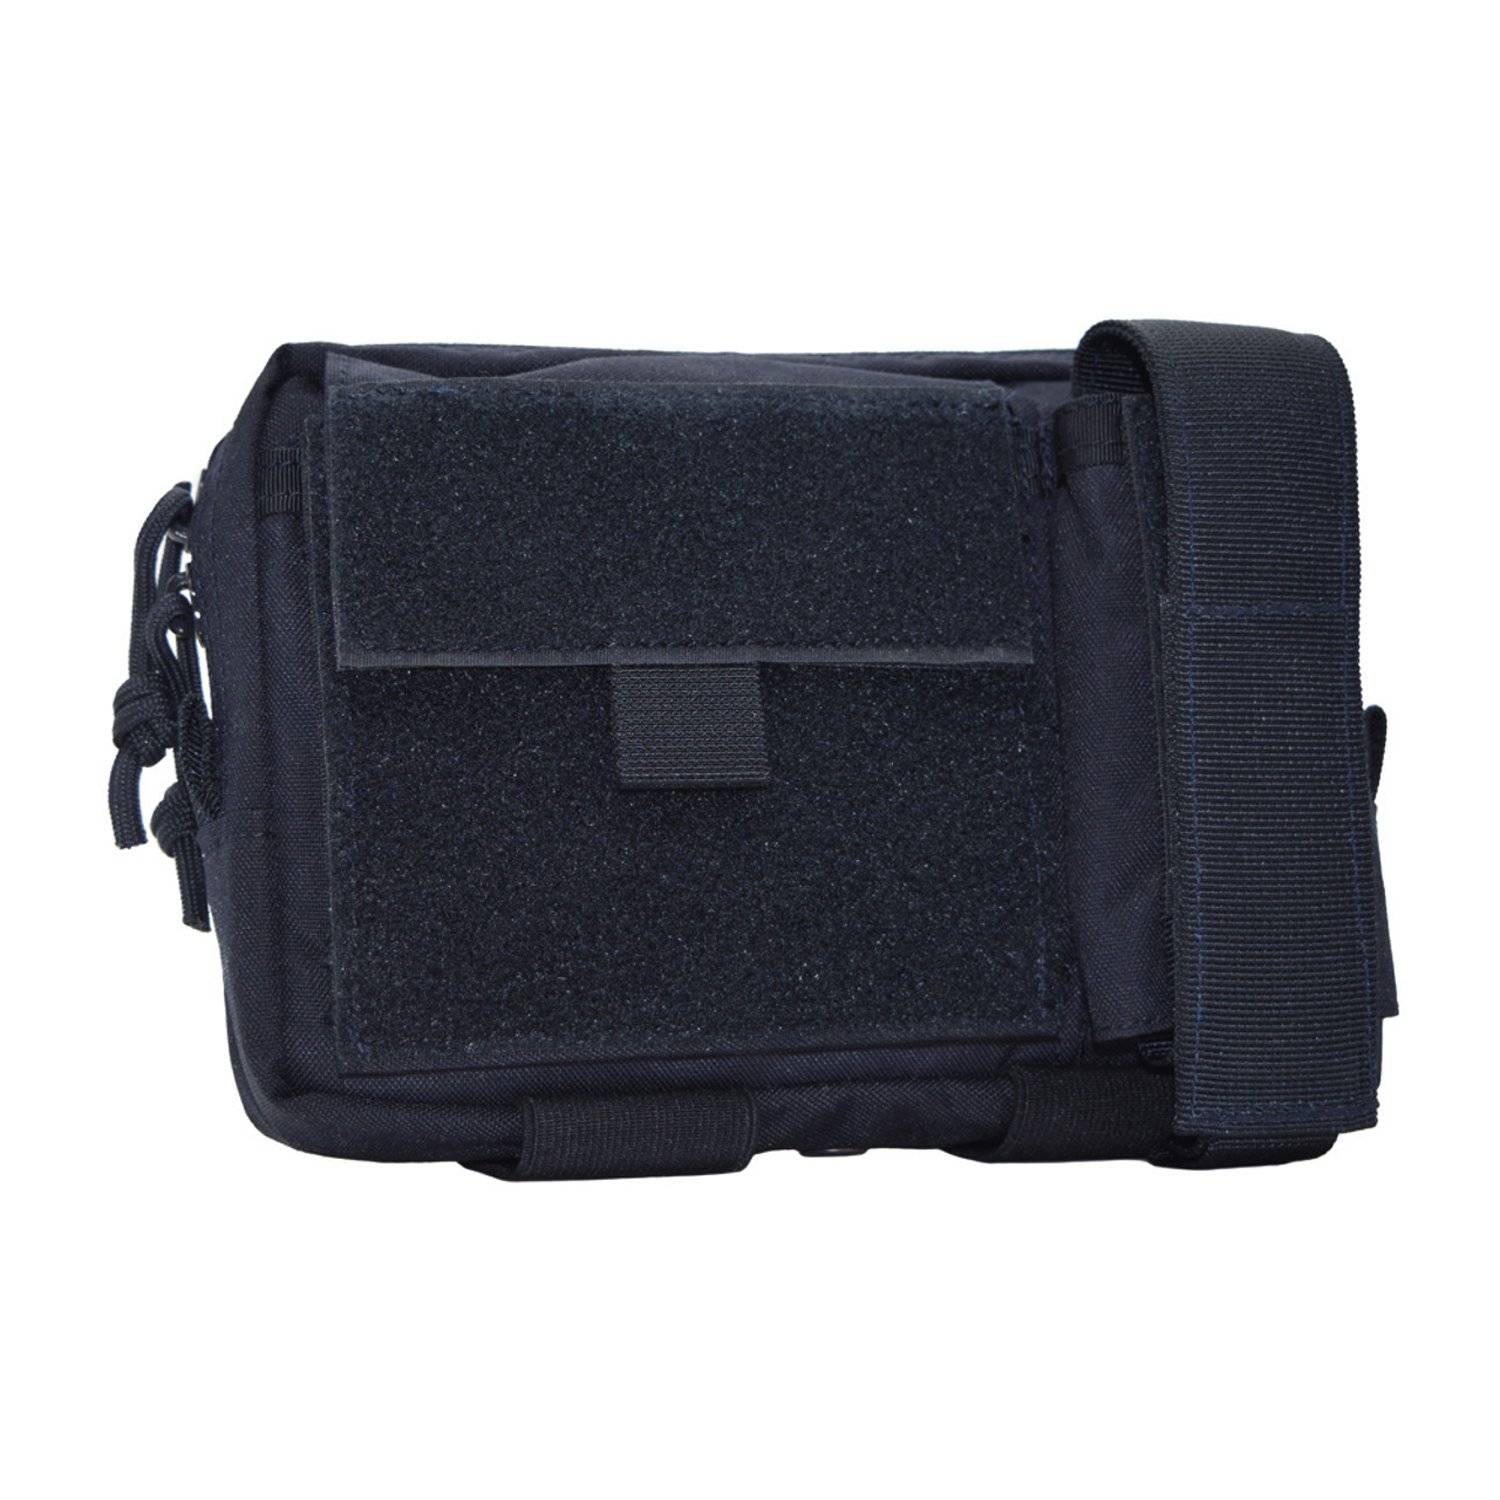 Shellback Tactical Super Admin Pouch in Galls